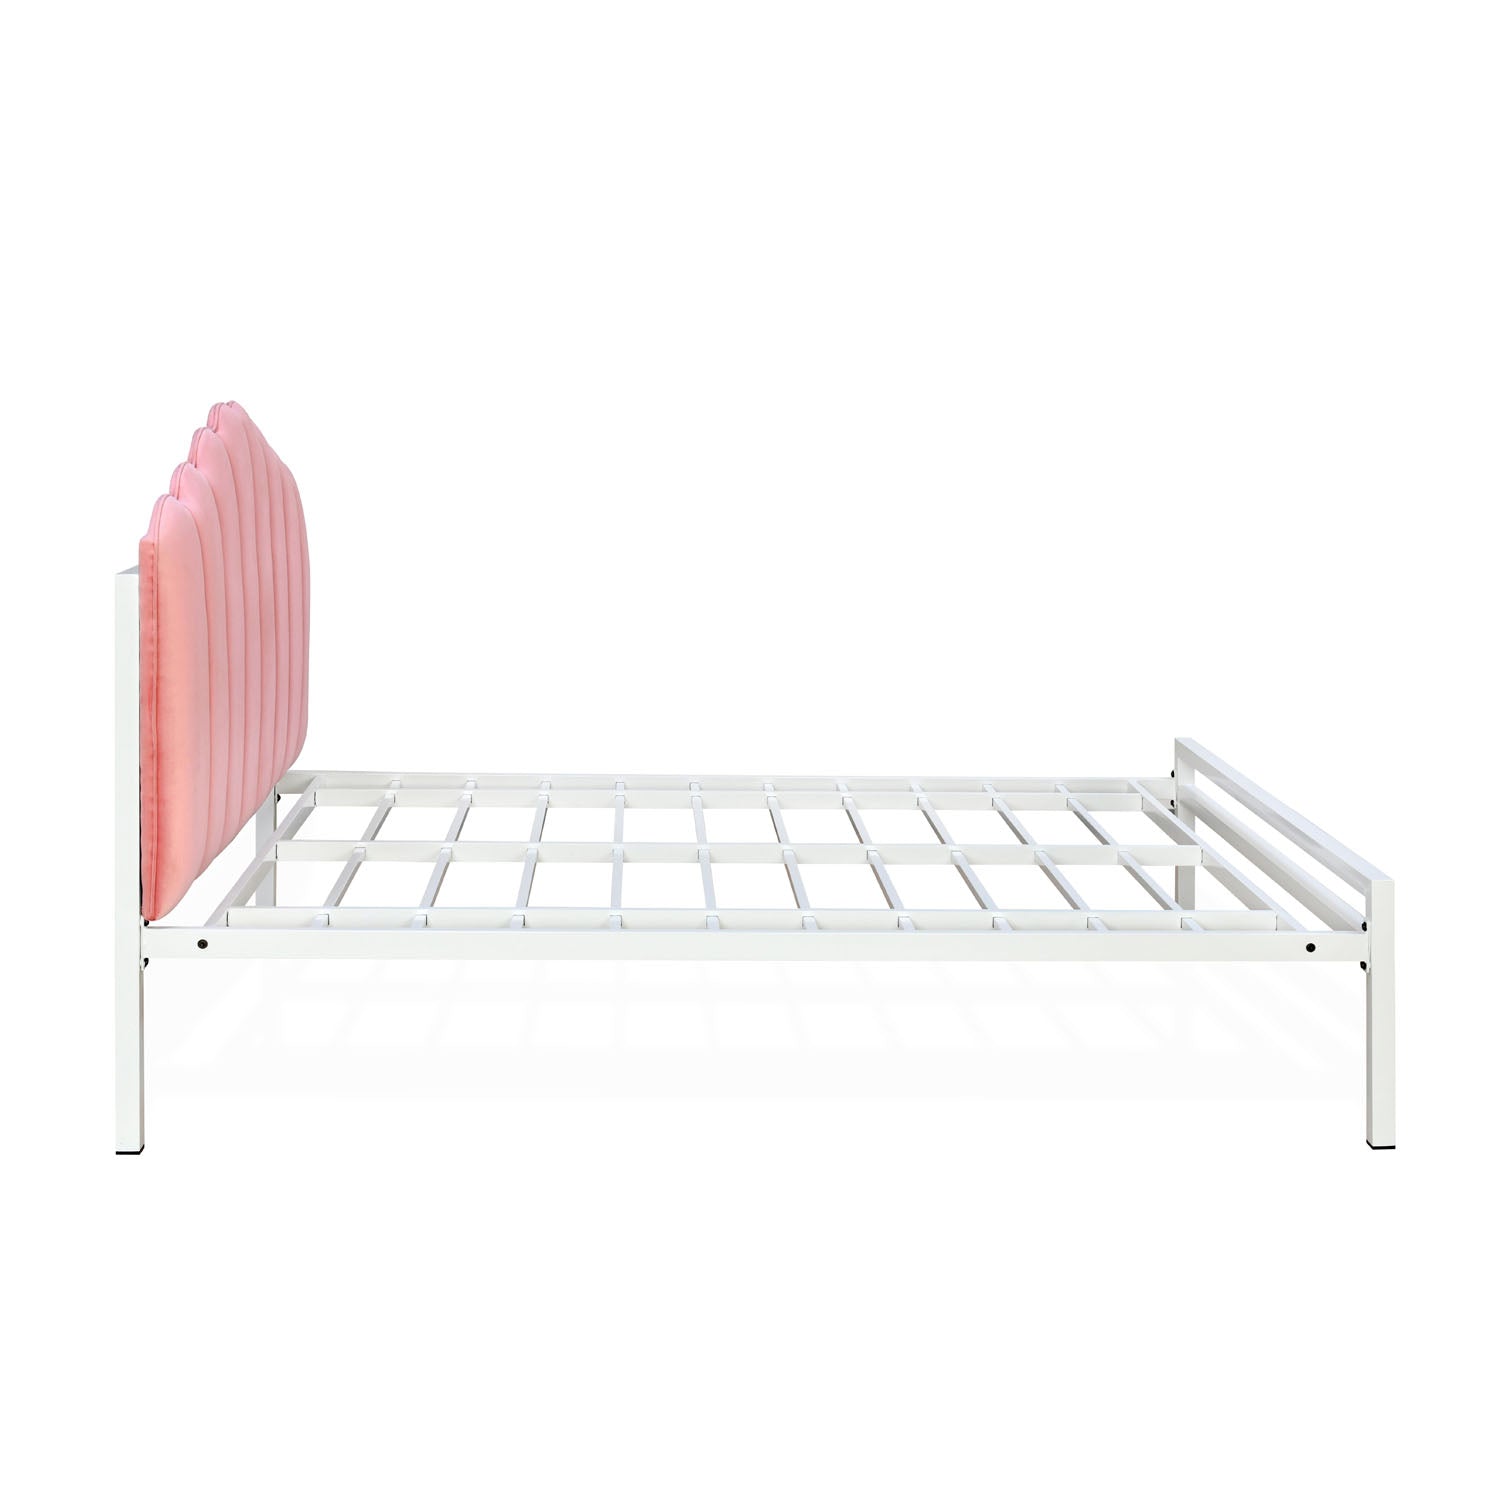 Lotus Upholstered Headboard Without Storage Queen Bed (Pink & White)